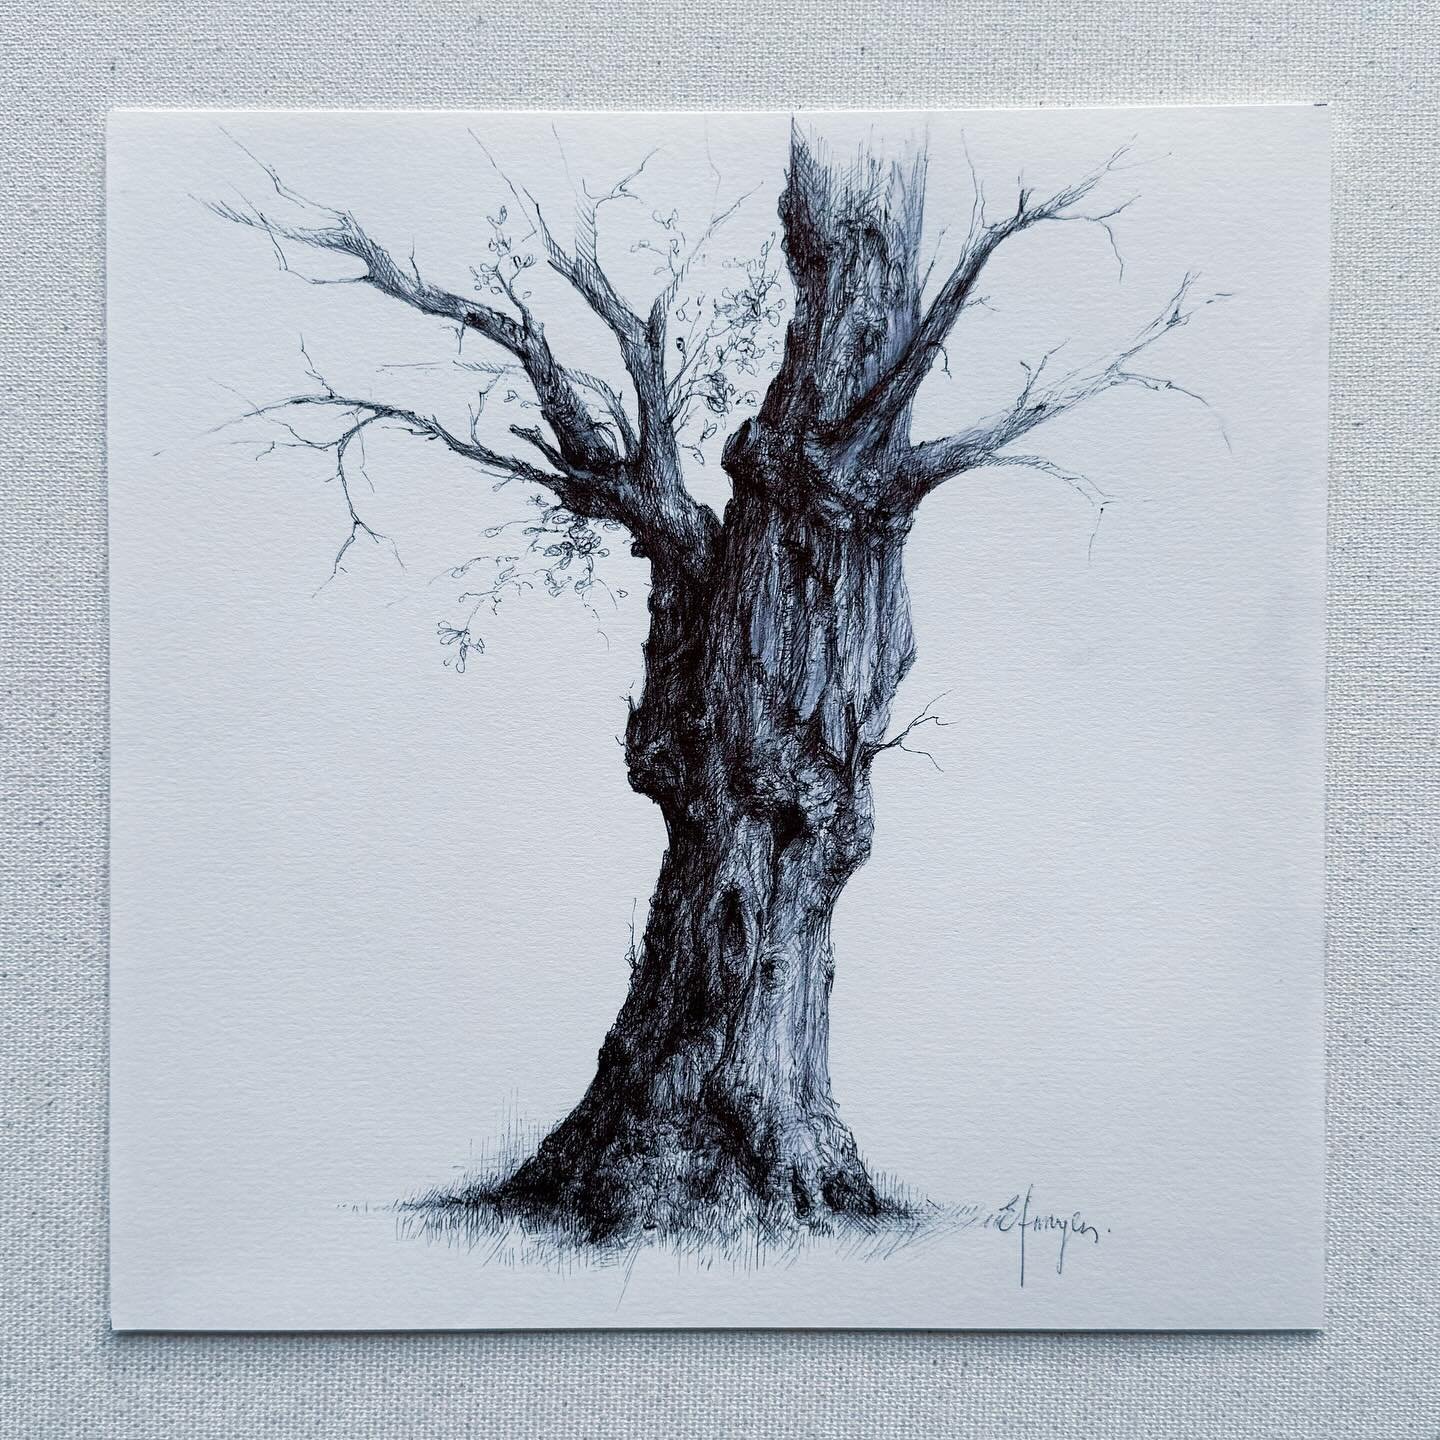 Vintage tree sketch, the first is my favourite today!